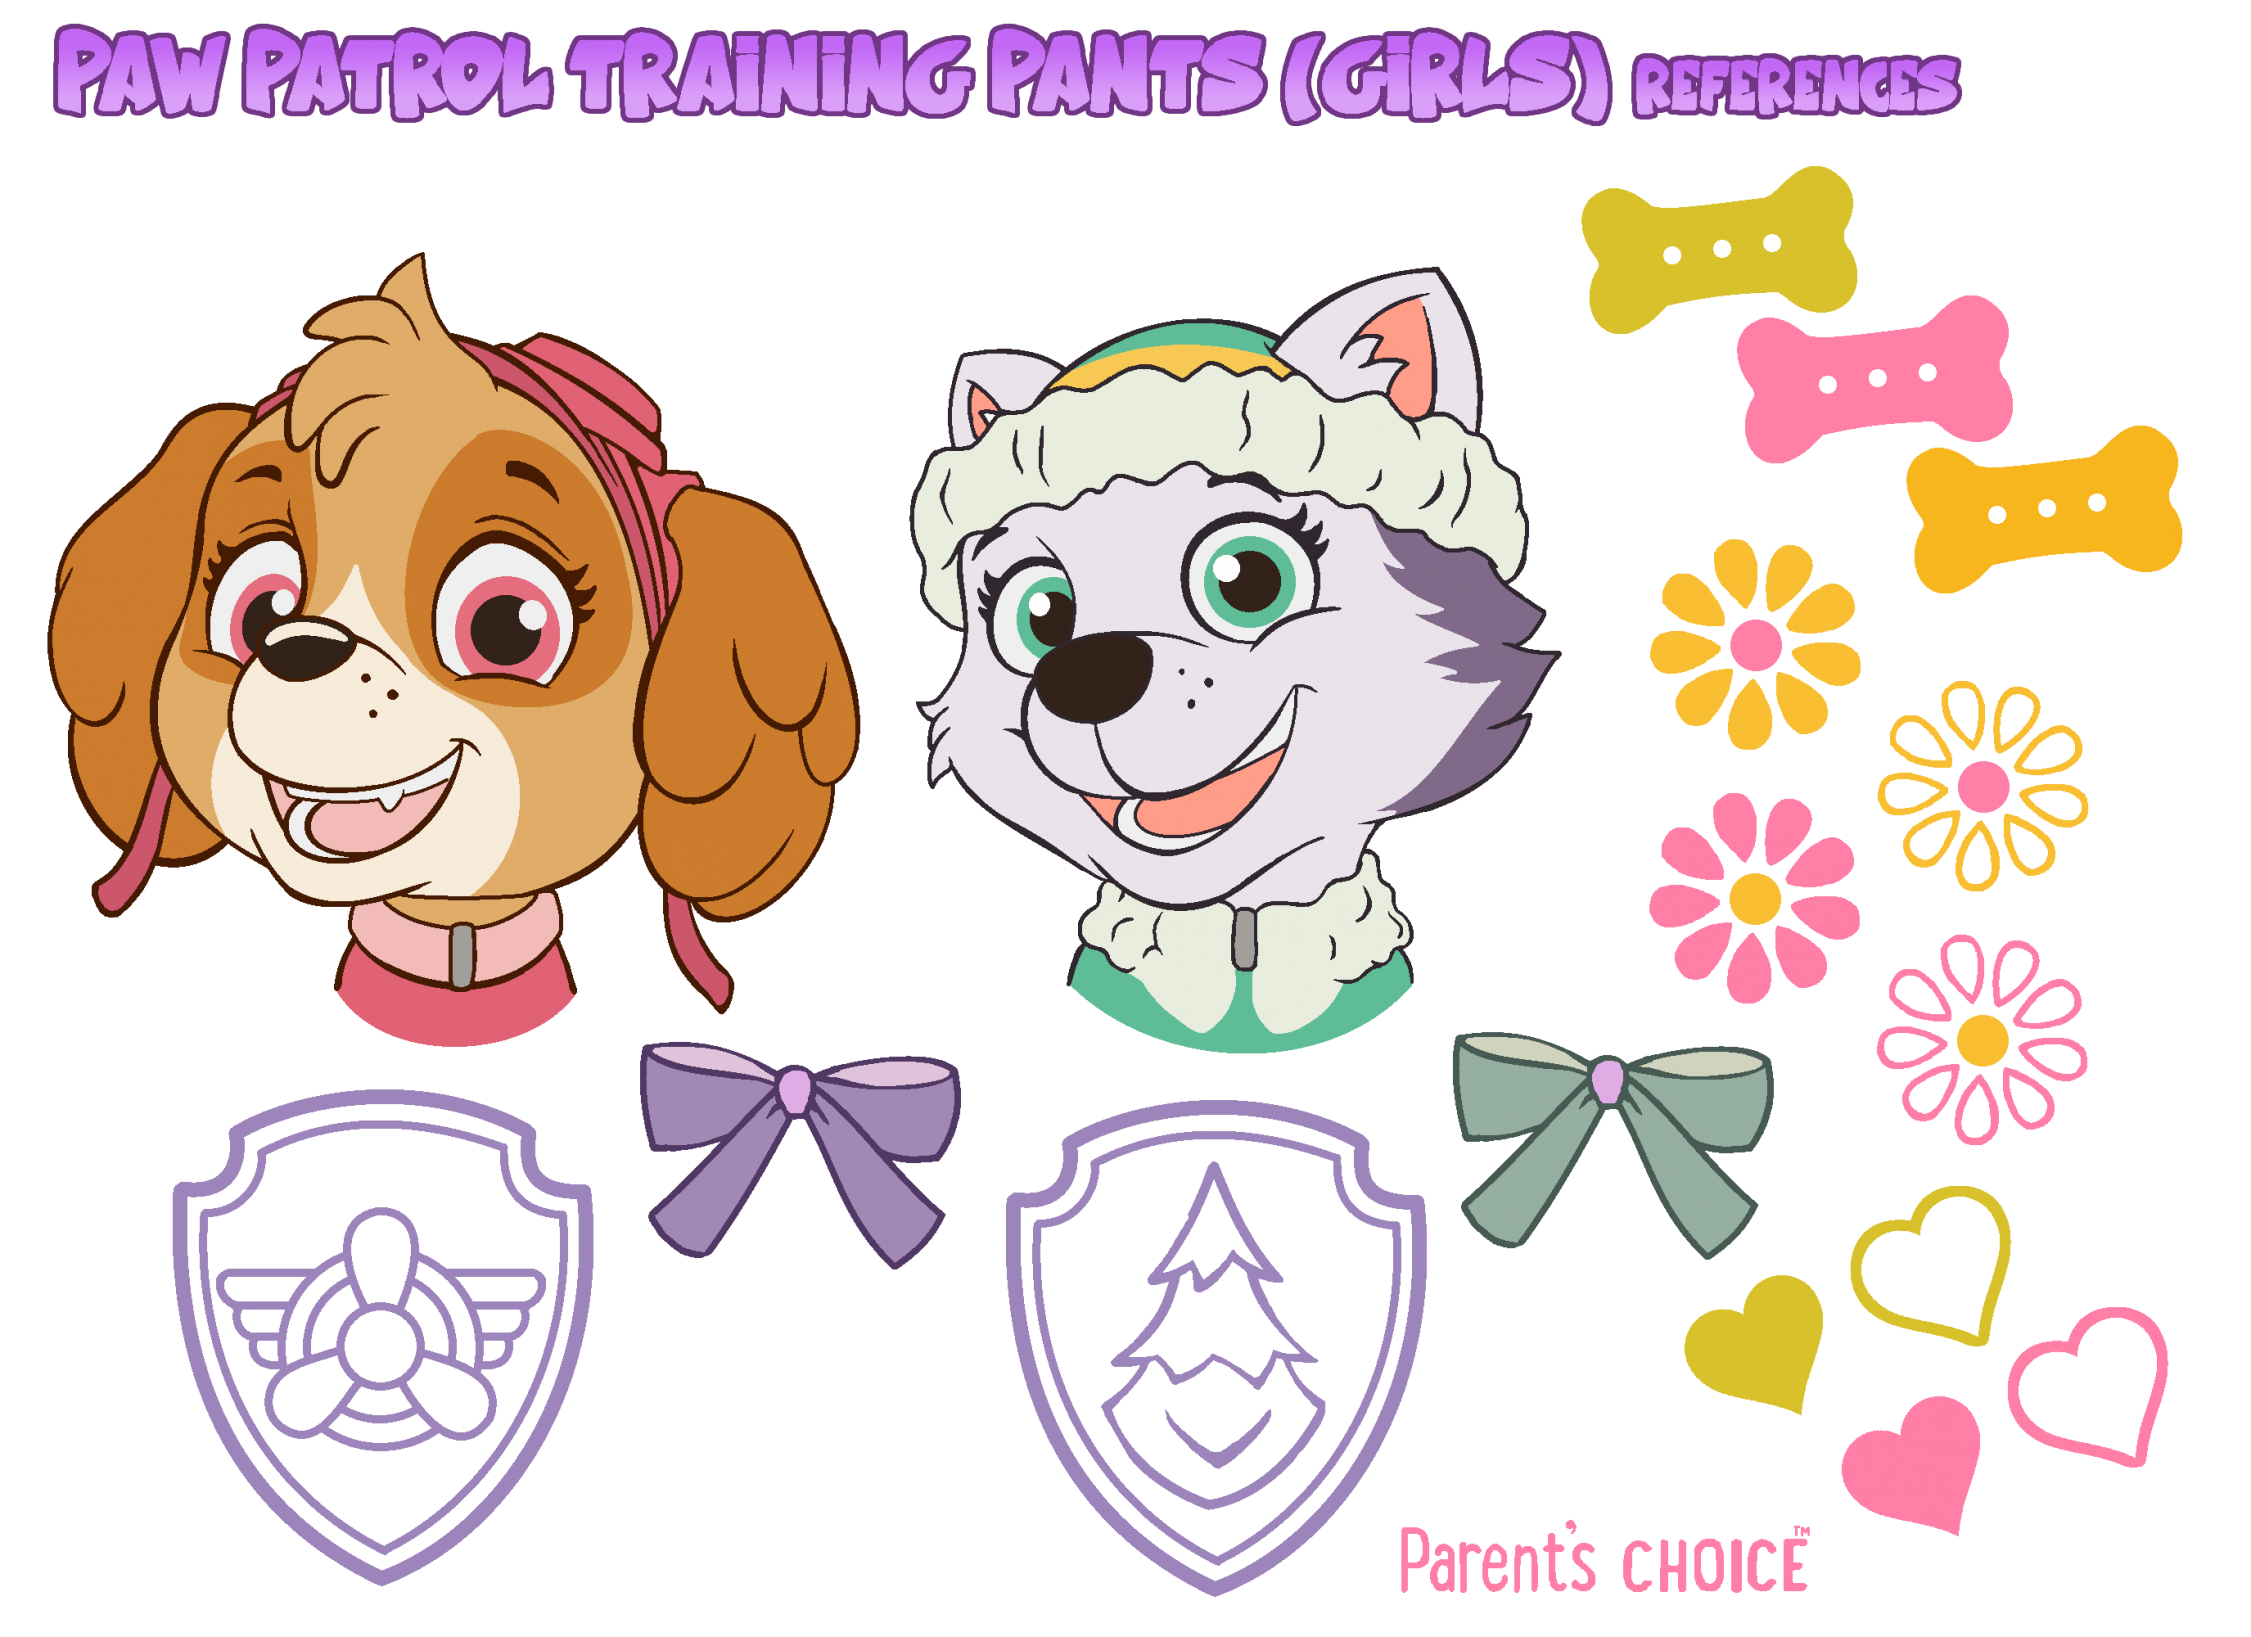 PAW Patrol training pants references (Girls) by yipthecoyotepup